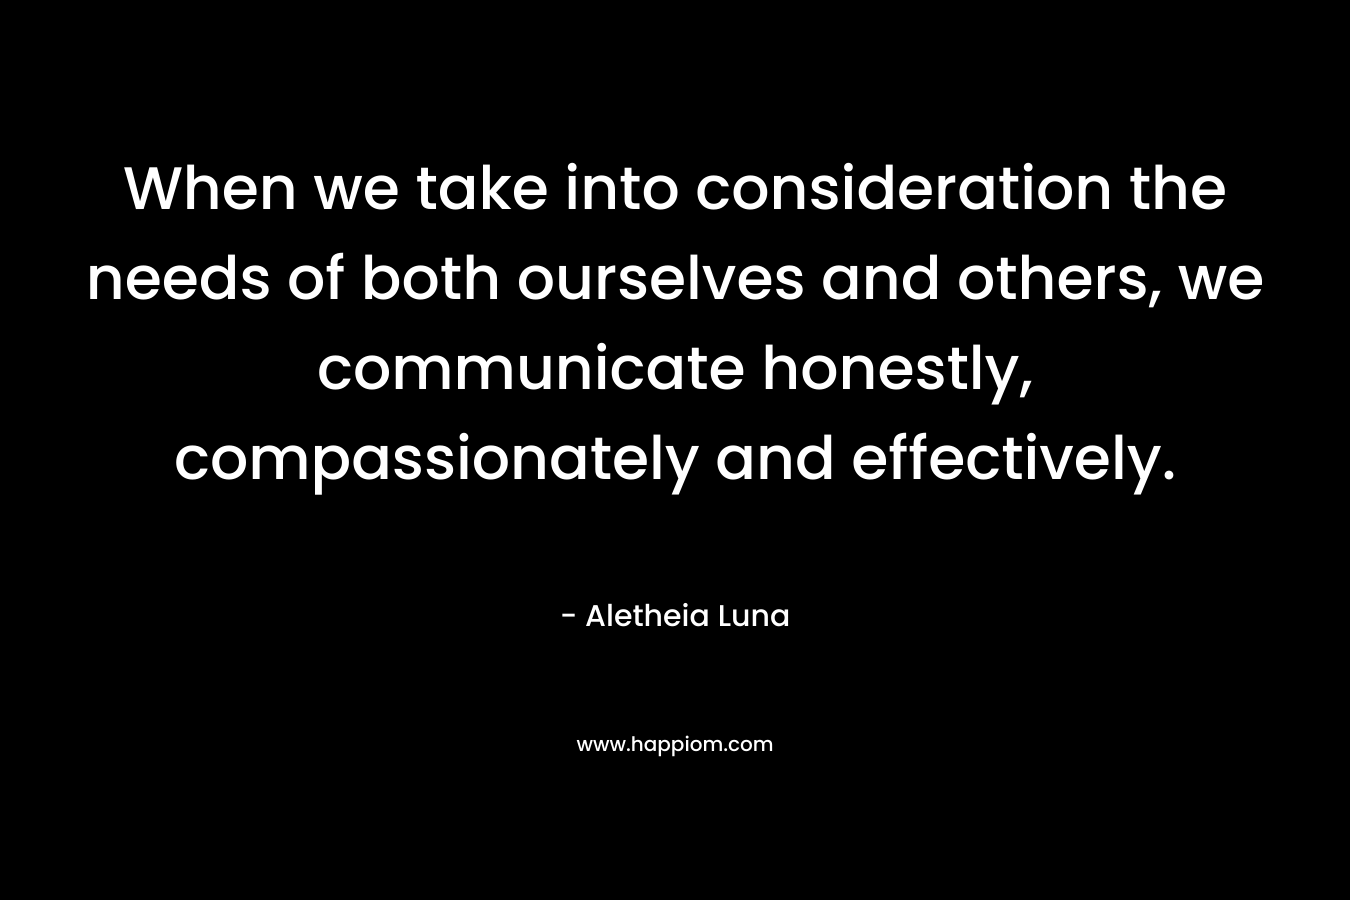 When we take into consideration the needs of both ourselves and others, we communicate honestly, compassionately and effectively.